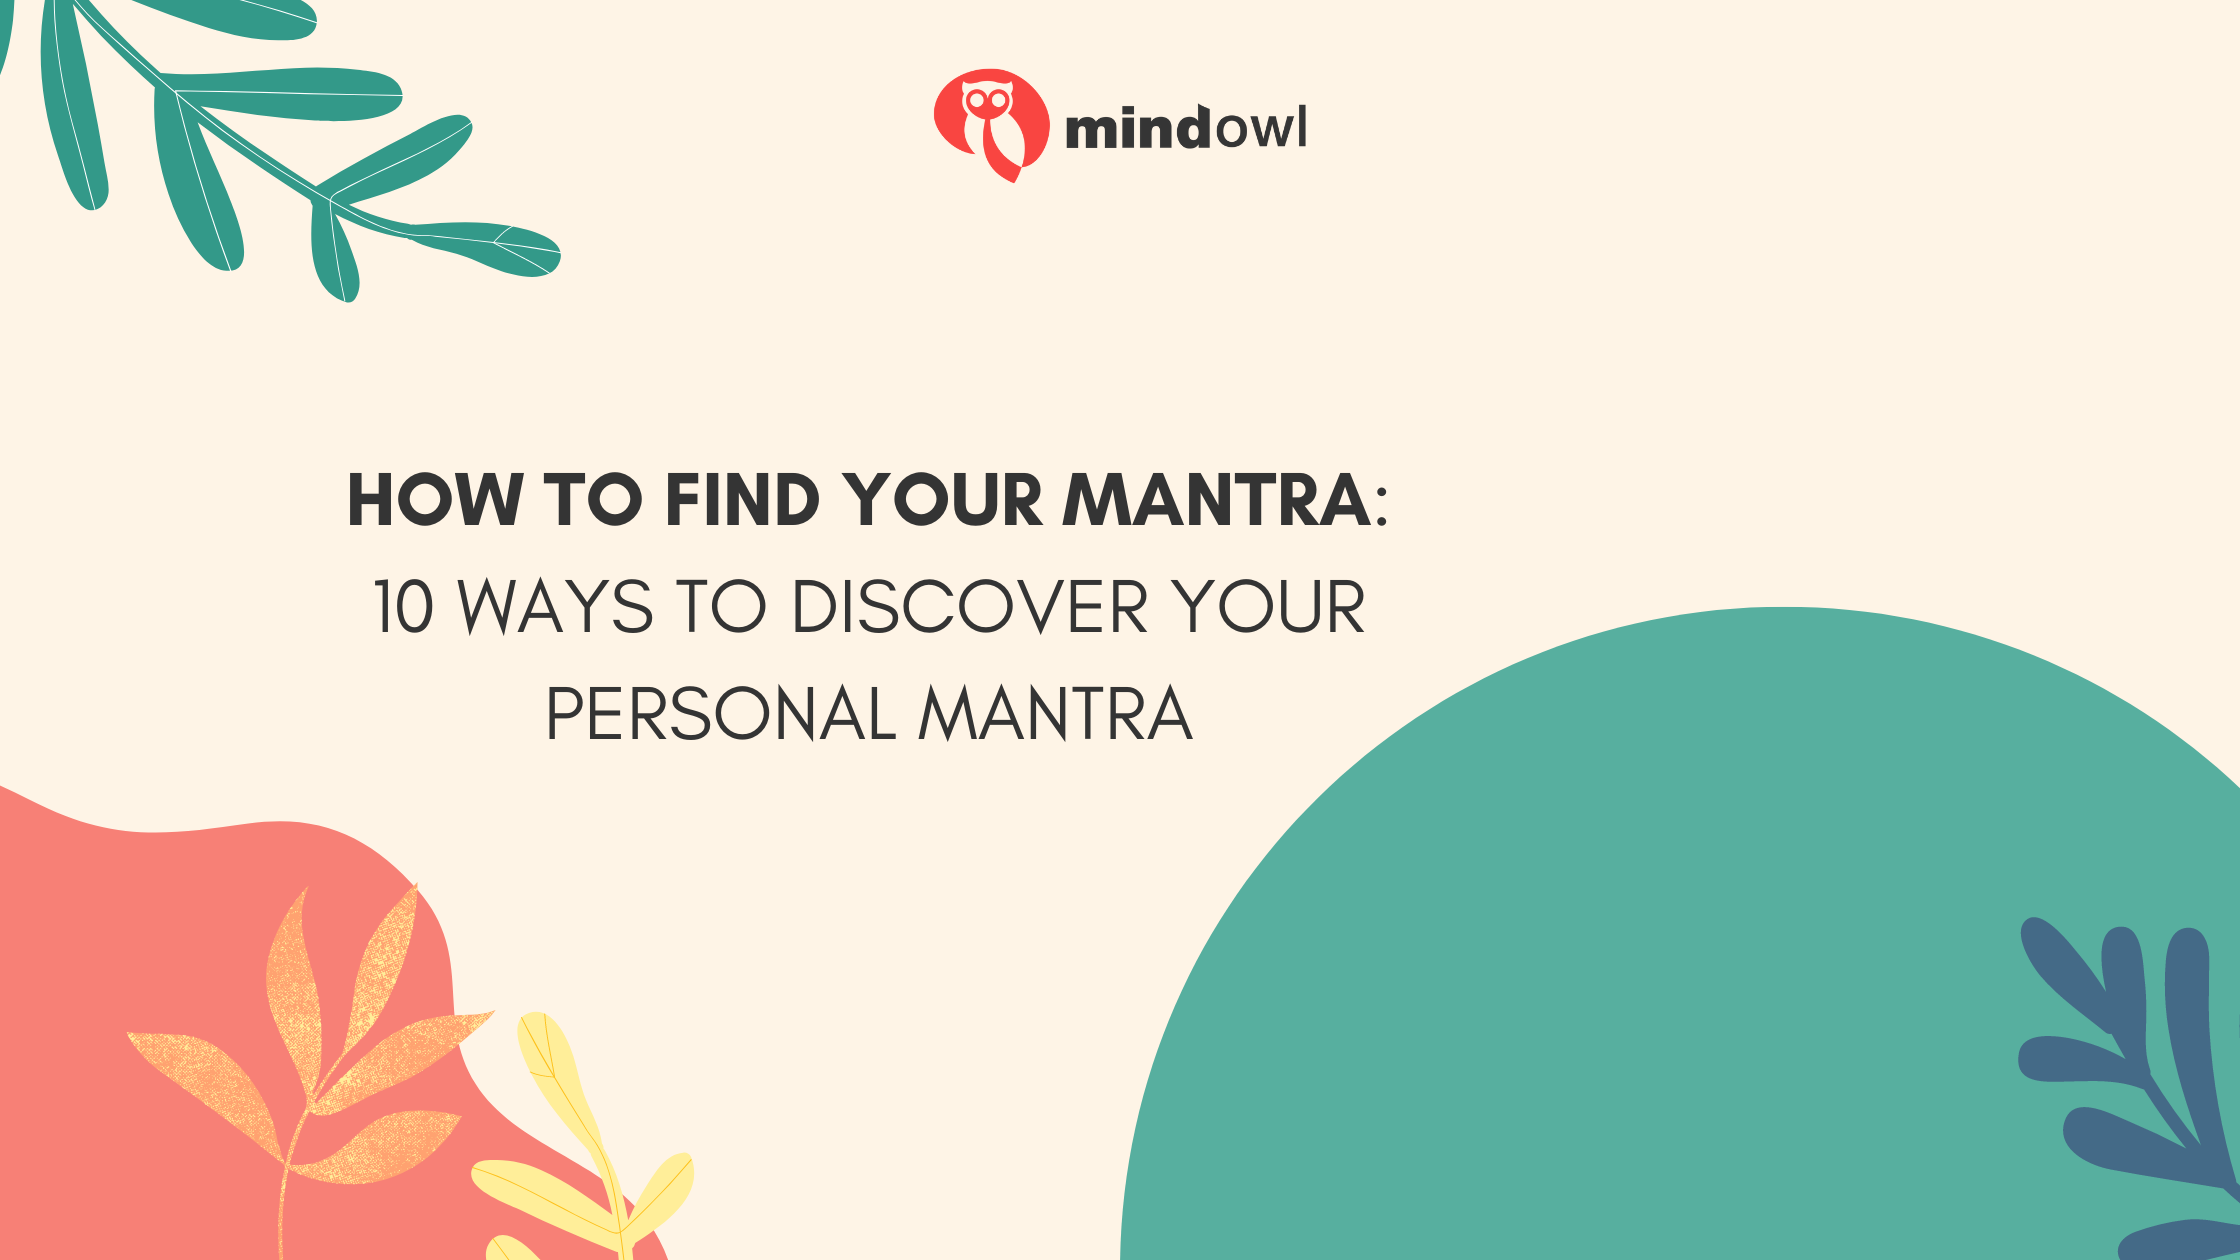 How To Find Your Mantra: 10 Ways To Discover Your Personal Mantra